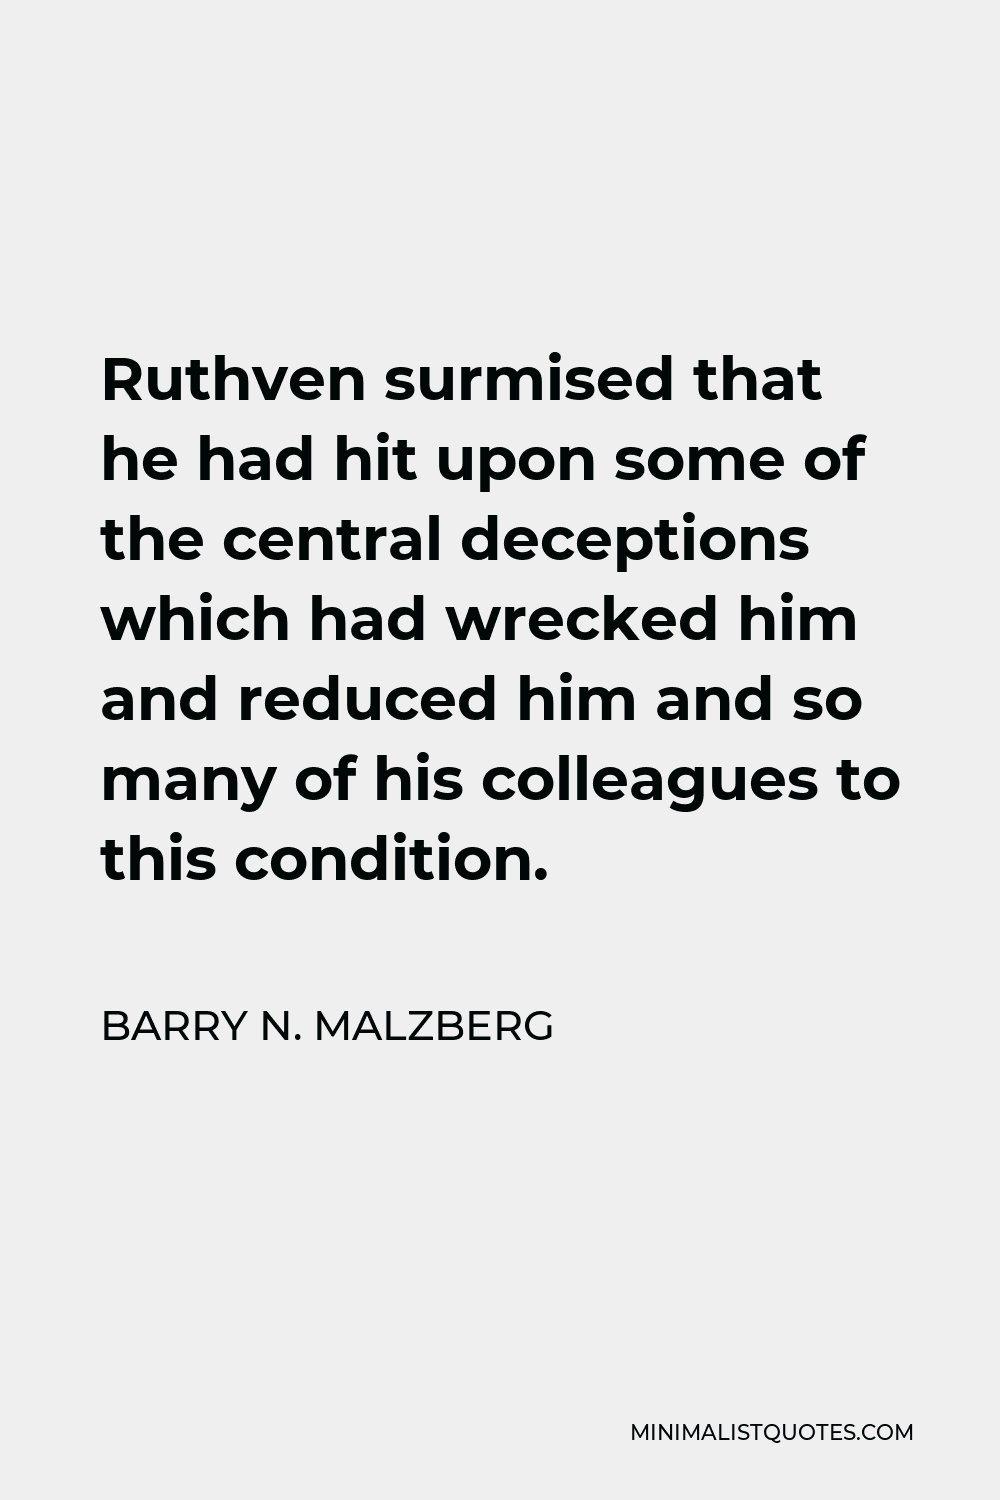 Barry N. Malzberg Quote - Ruthven surmised that he had hit upon some of the central deceptions which had wrecked him and reduced him and so many of his colleagues to this condition.